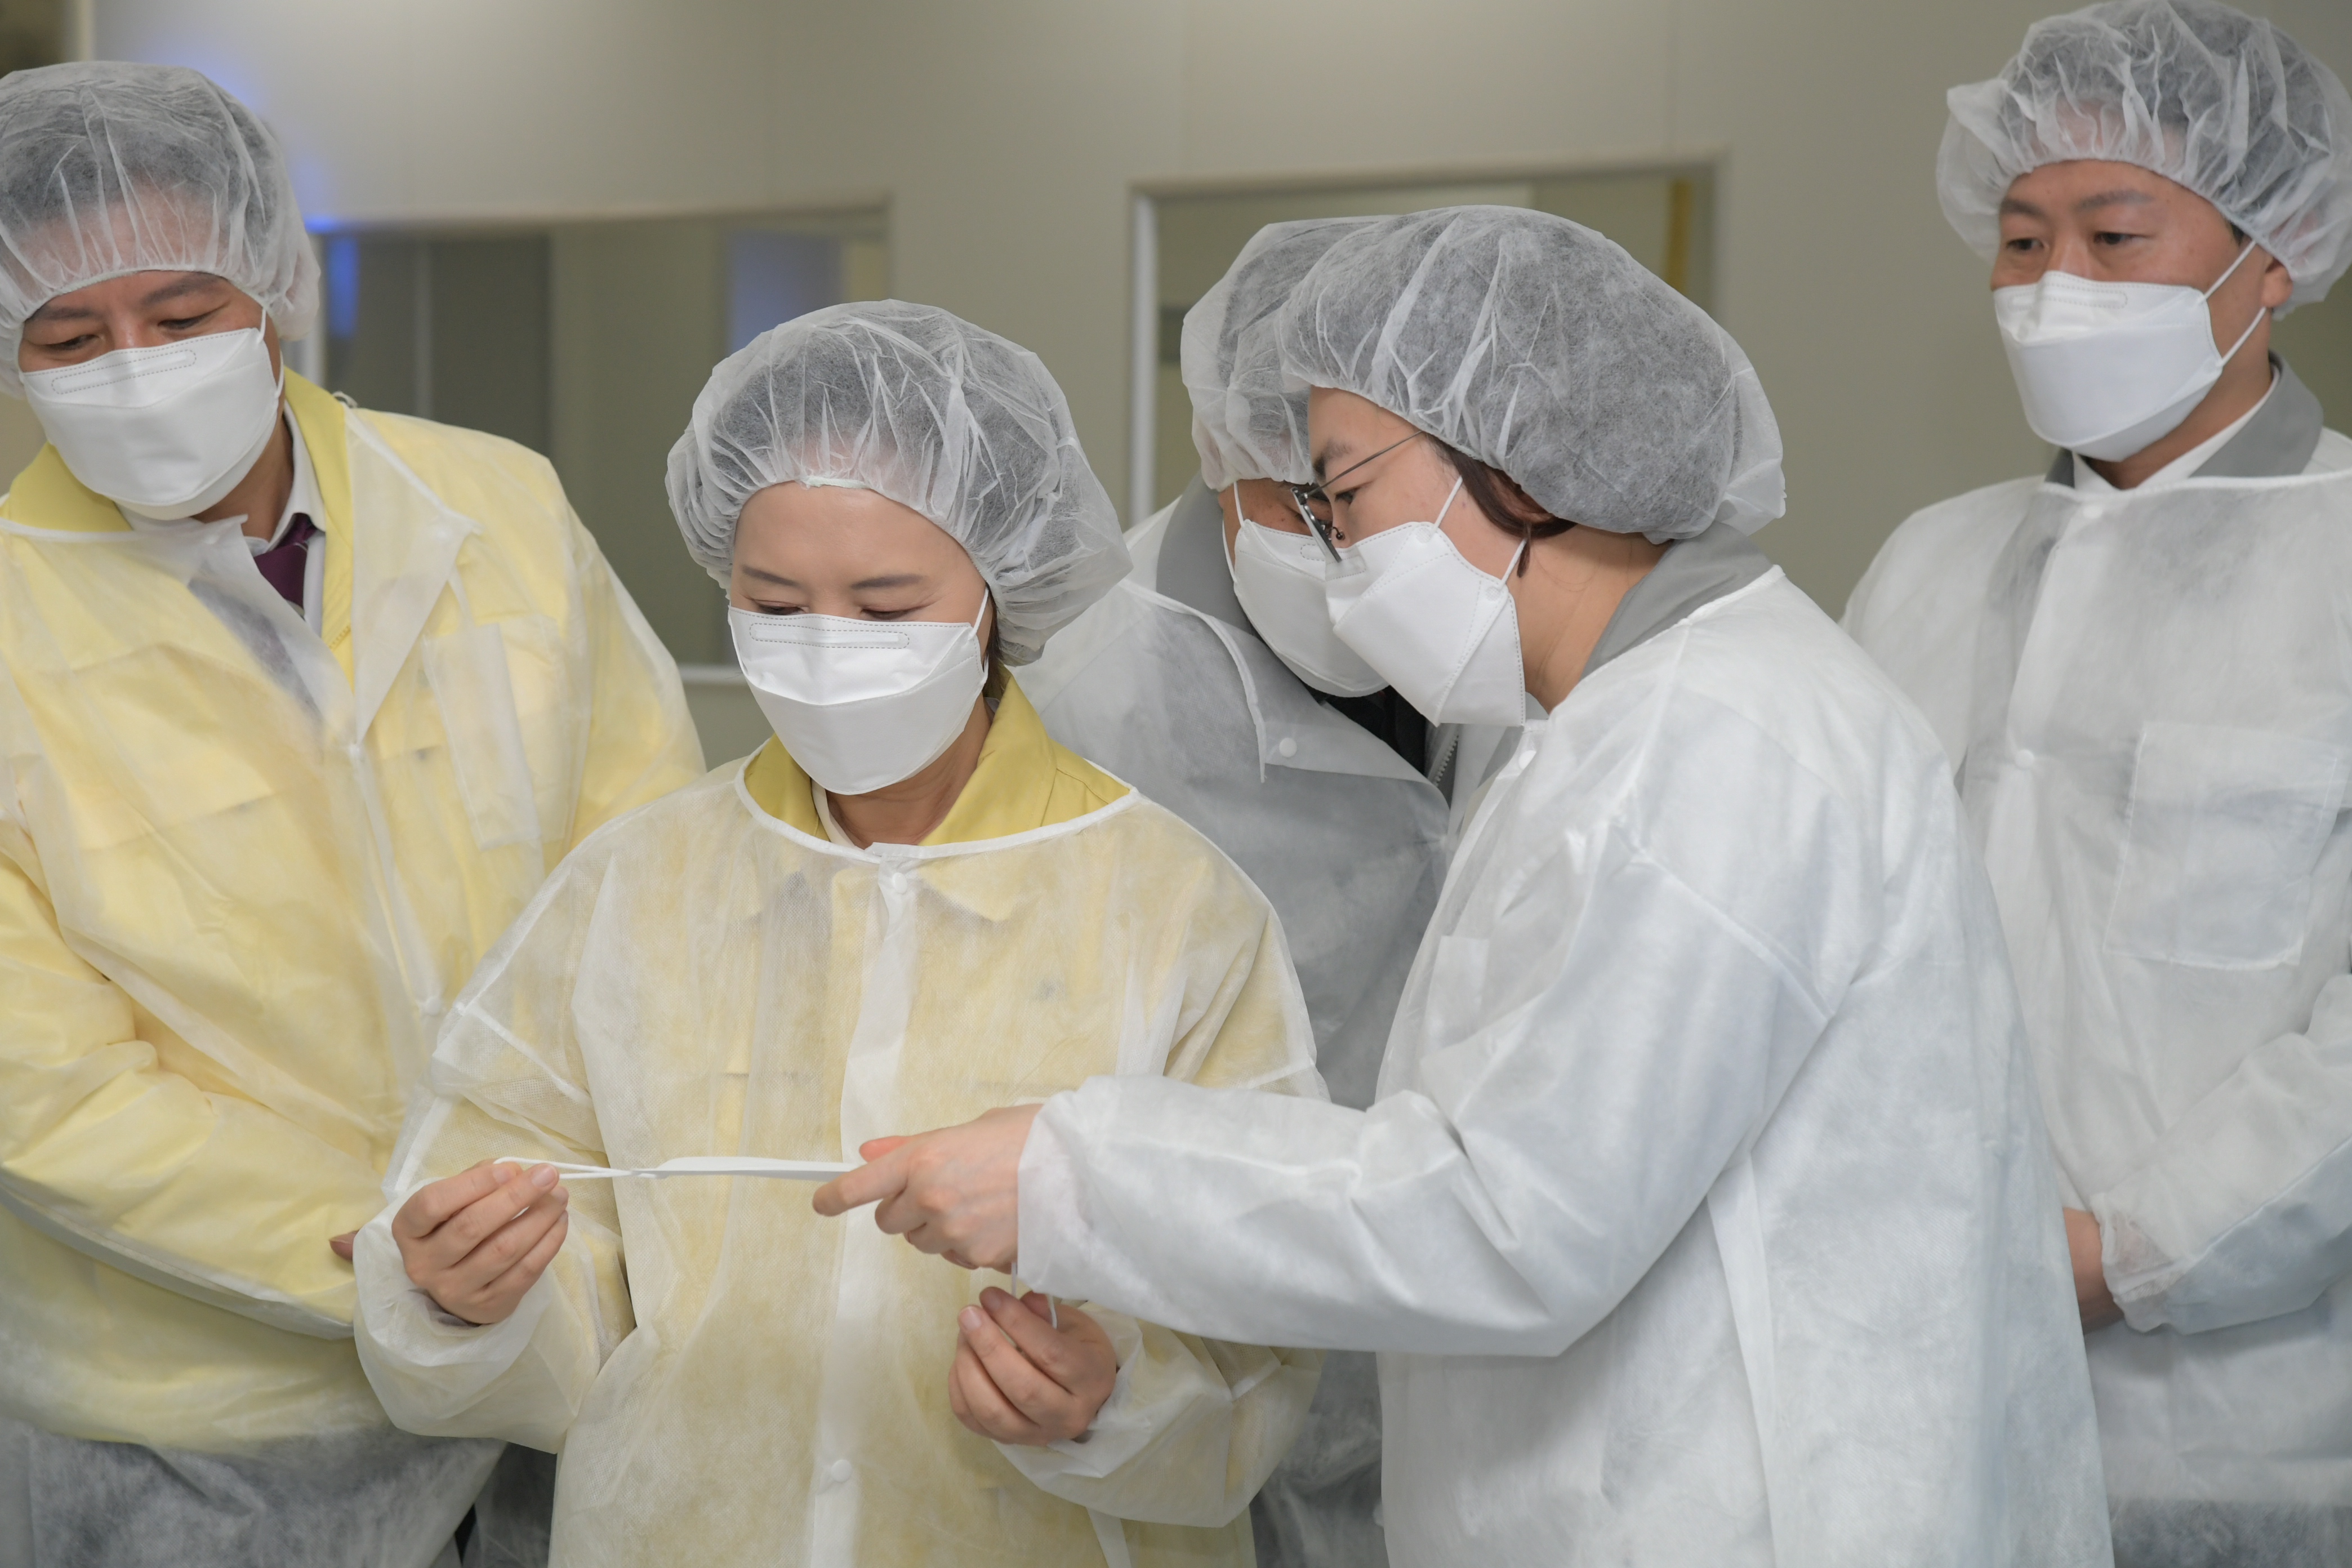 Photo News5 - [Mar. 16, 2020] Minister conducts inspection of filtering respirator manufacturing site